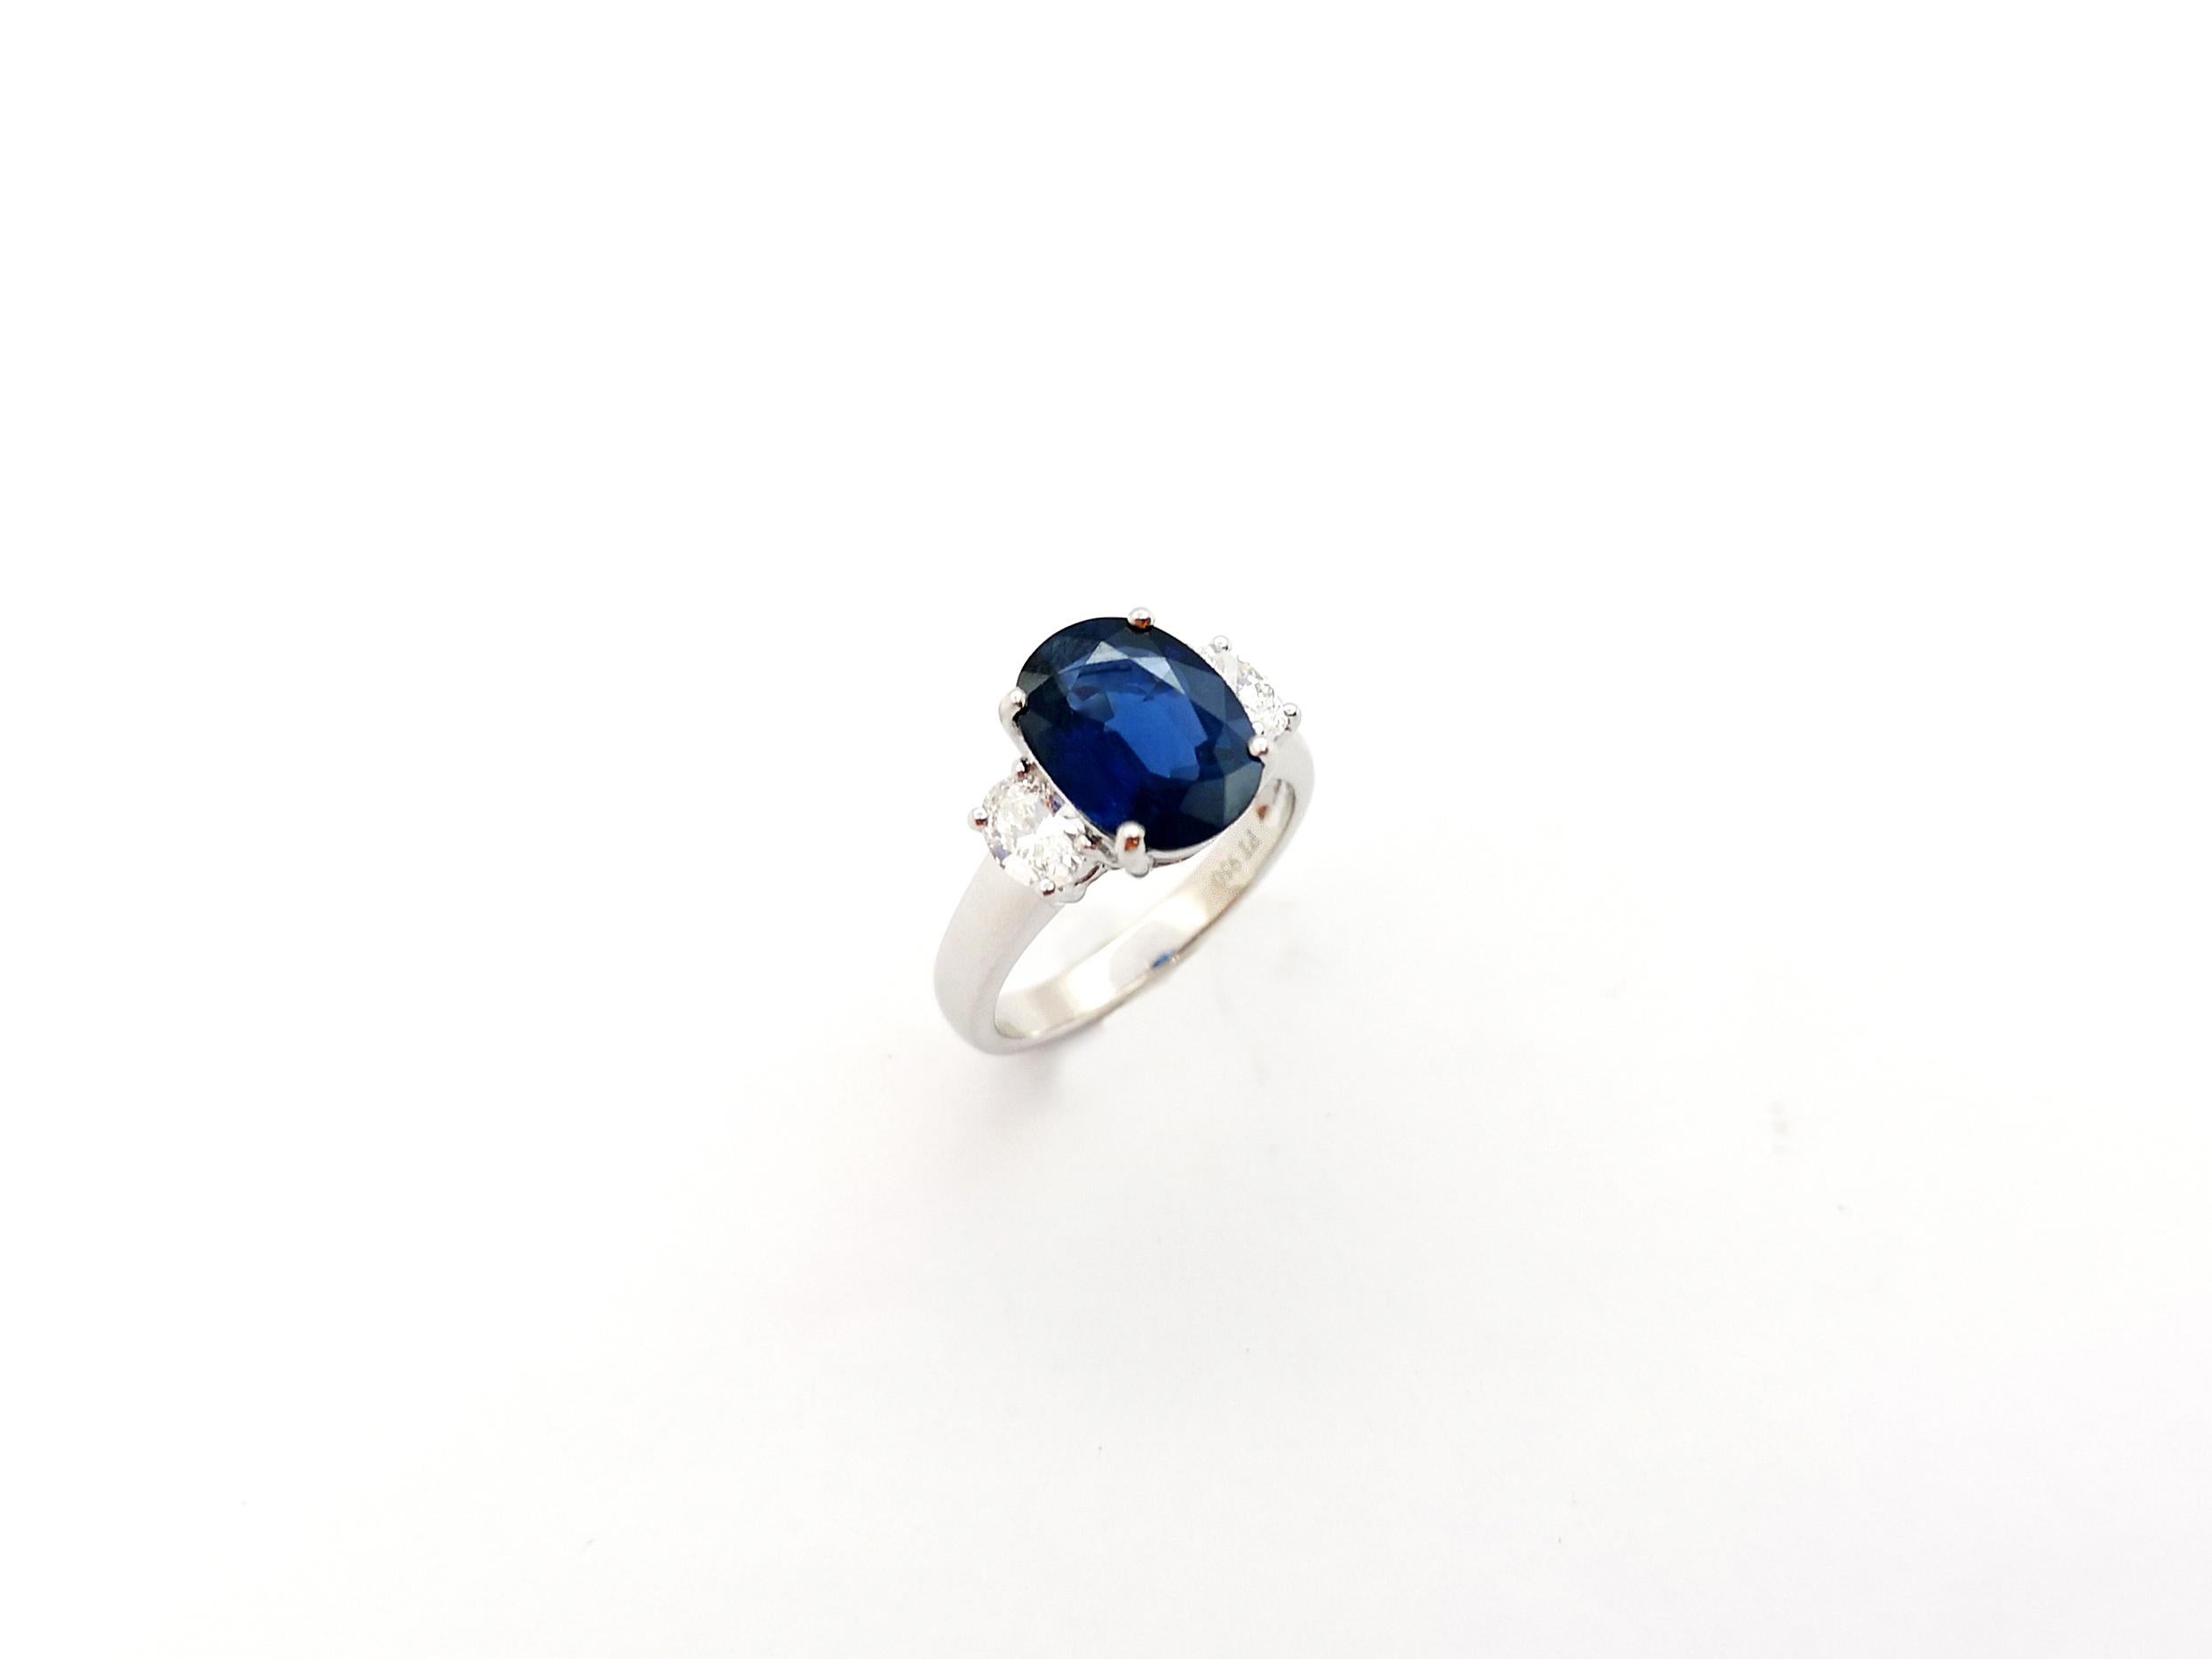 GIA Certified 3.89 cts Blue Sapphire with Diamond Ring set in Platinum 950  For Sale 7